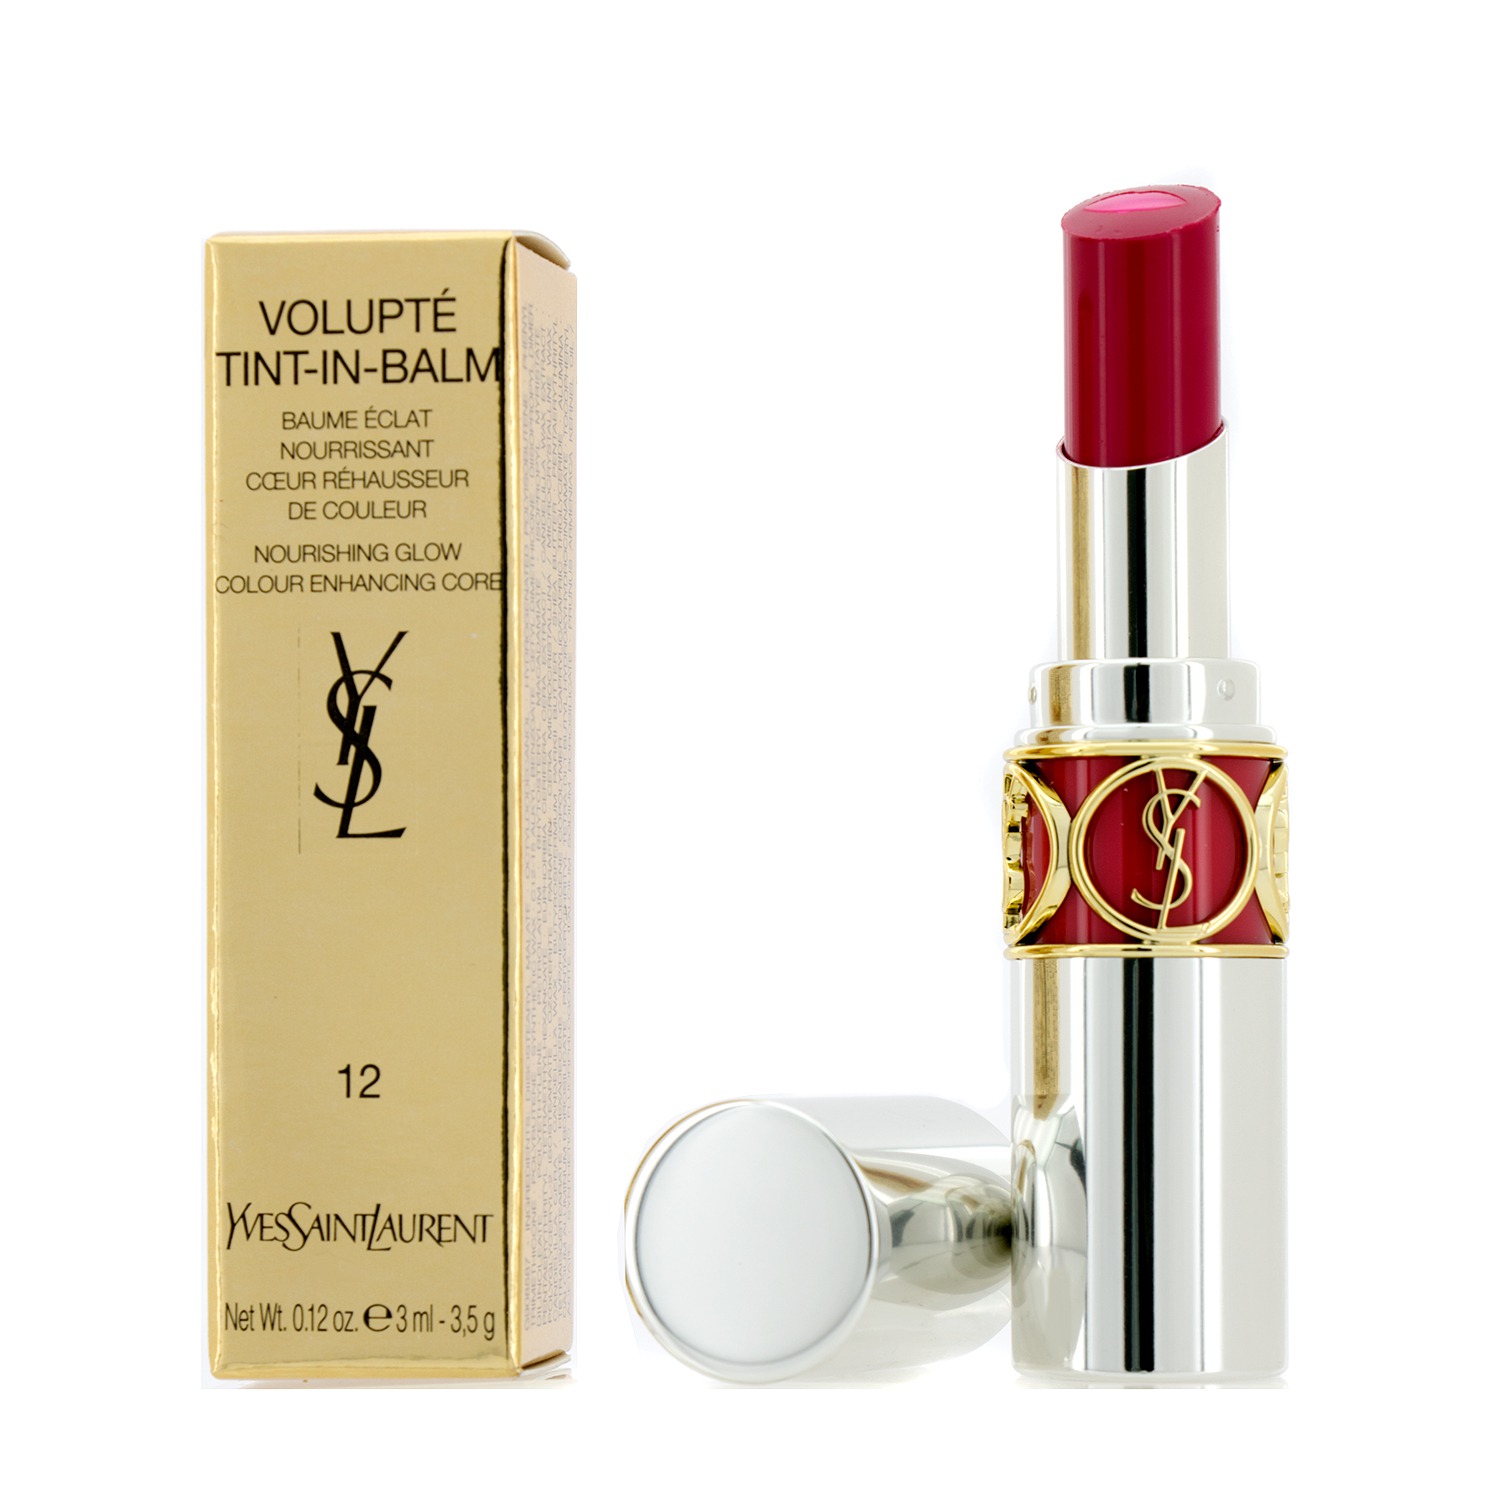 Volupte Tint In Balm - # 12 Try Me Berry Yves Saint Laurent Image